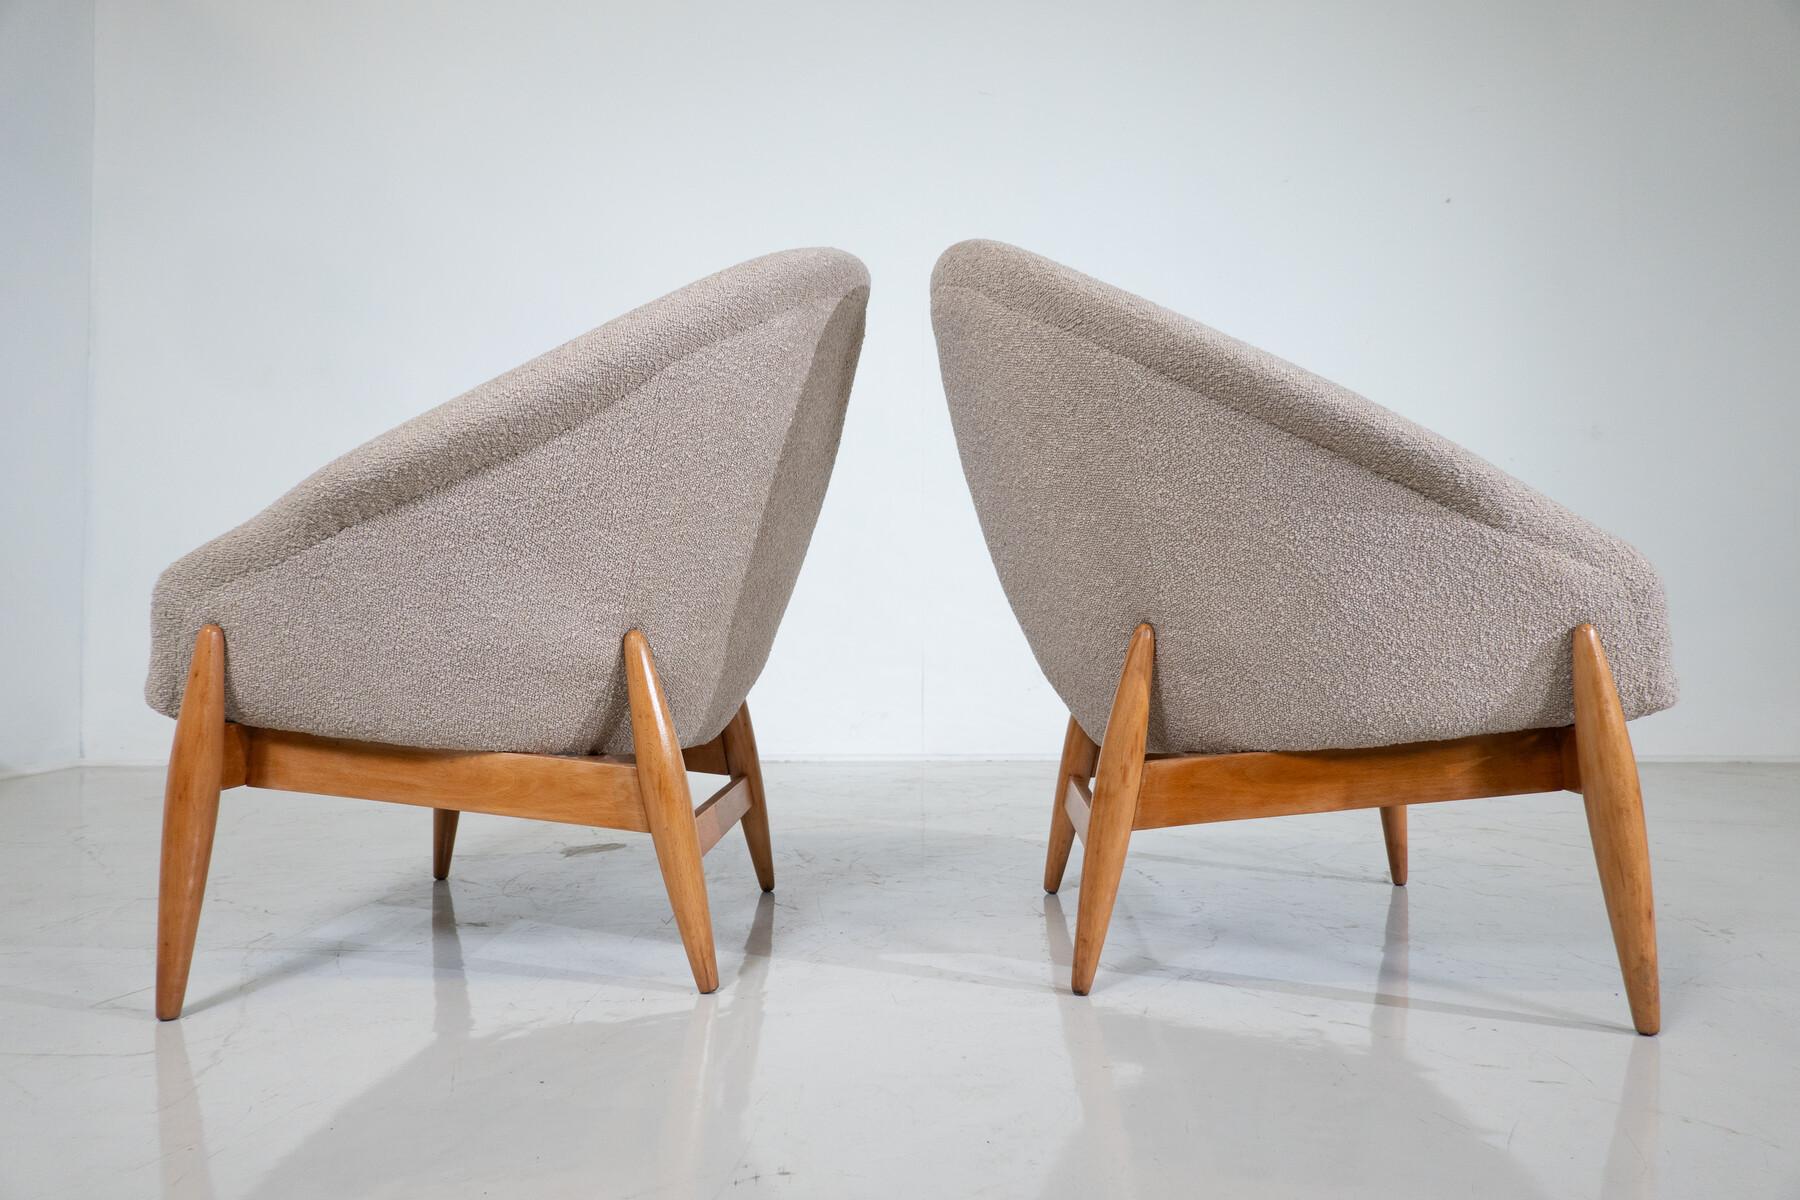 Pair of Mid-Century Modern Beige Fabric Armchairs by Julia Gaubek - Hungary 1950 For Sale 1